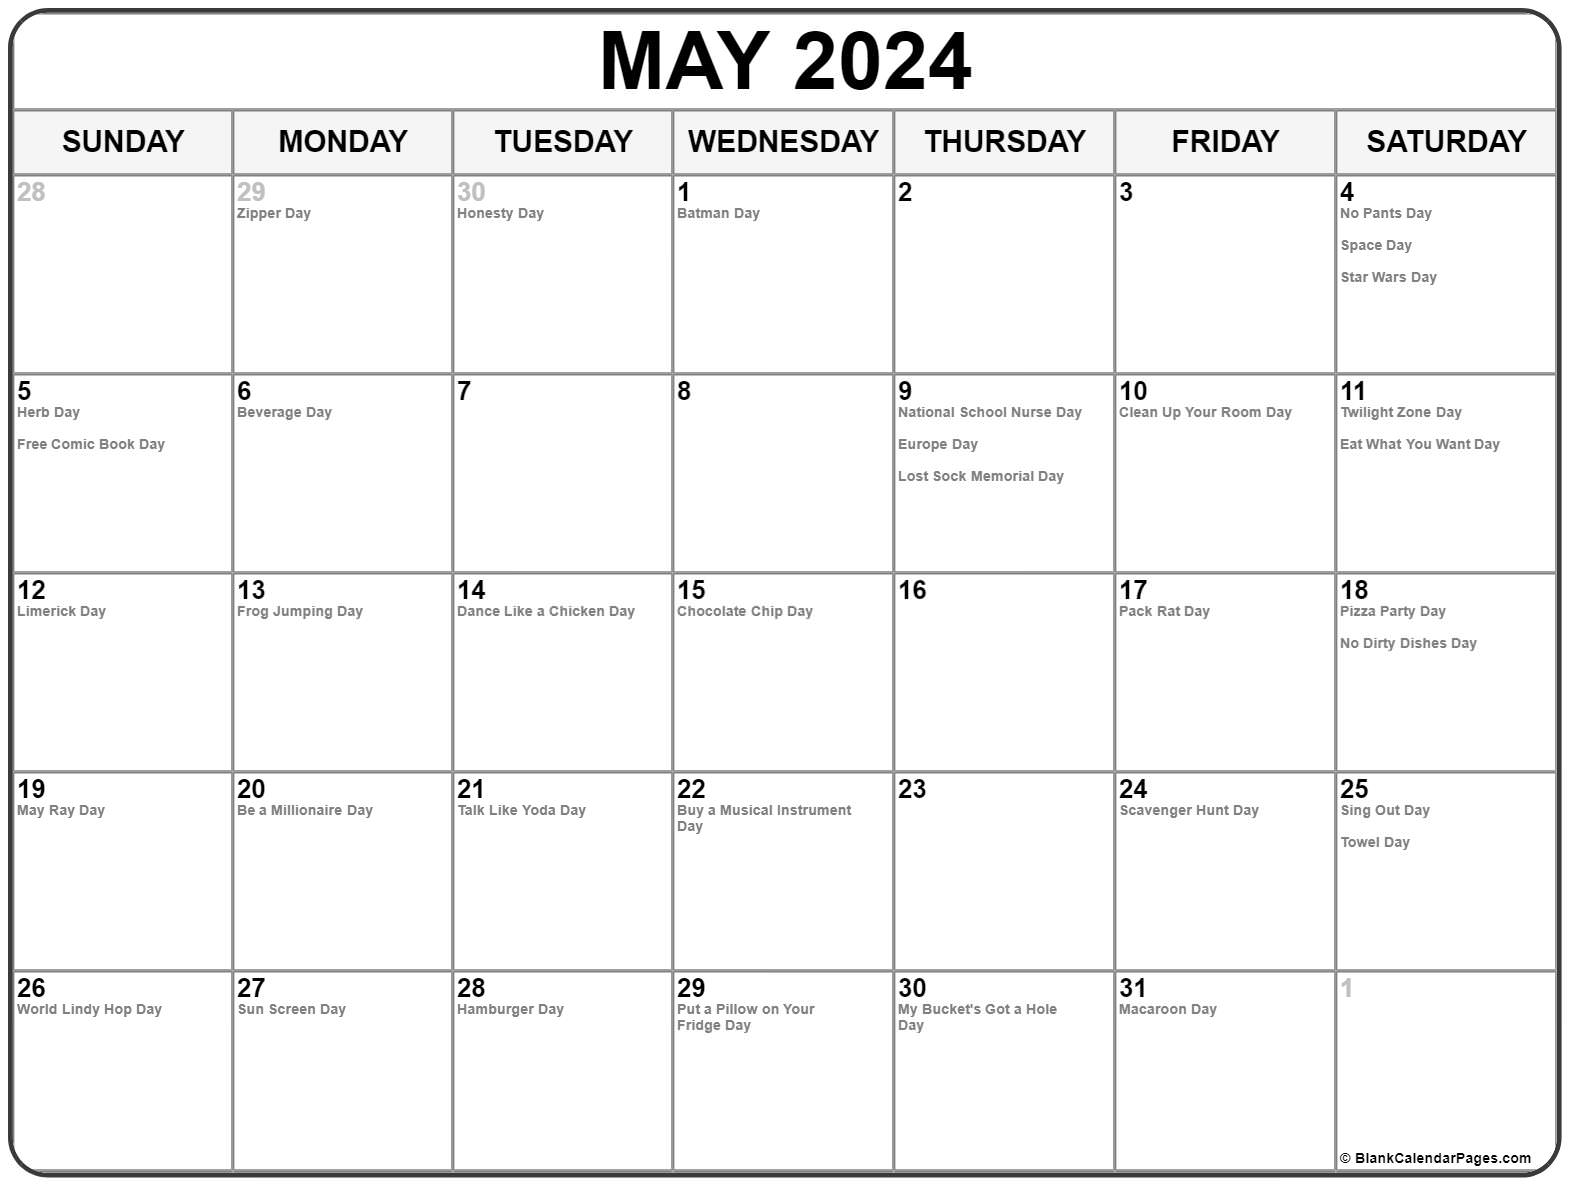 may-2023-calendar-with-holidays-printable-get-your-hands-on-amazing